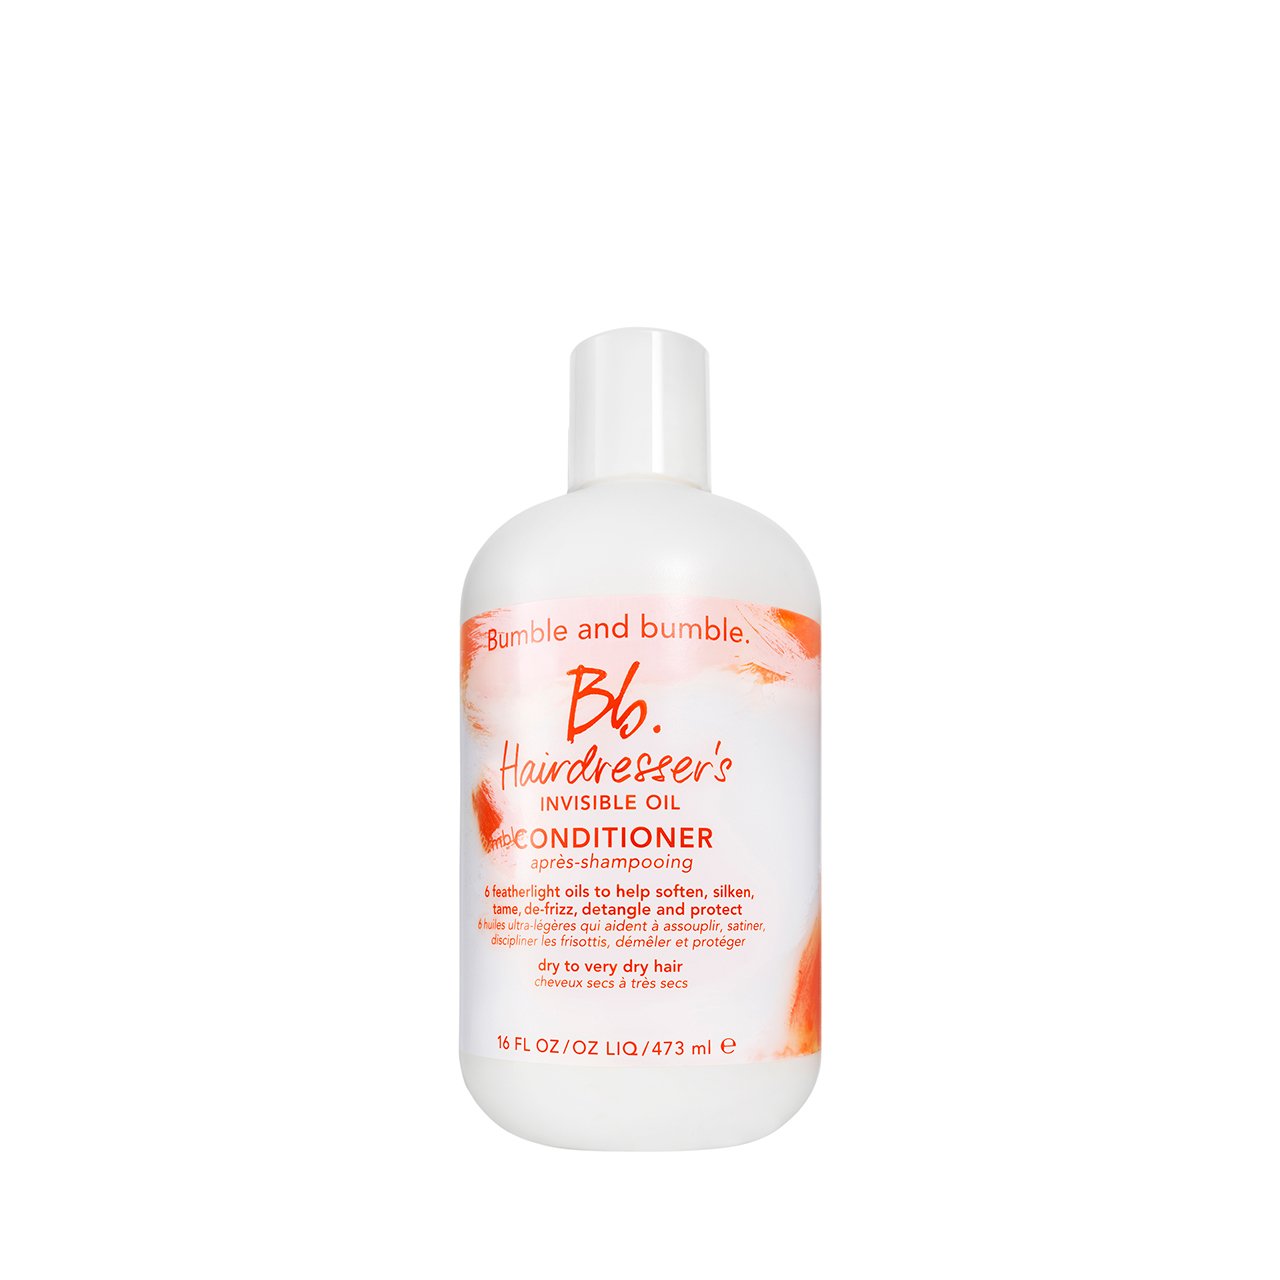 Bb. Hairdresser's Invisible Oil Conditioner Jumbette